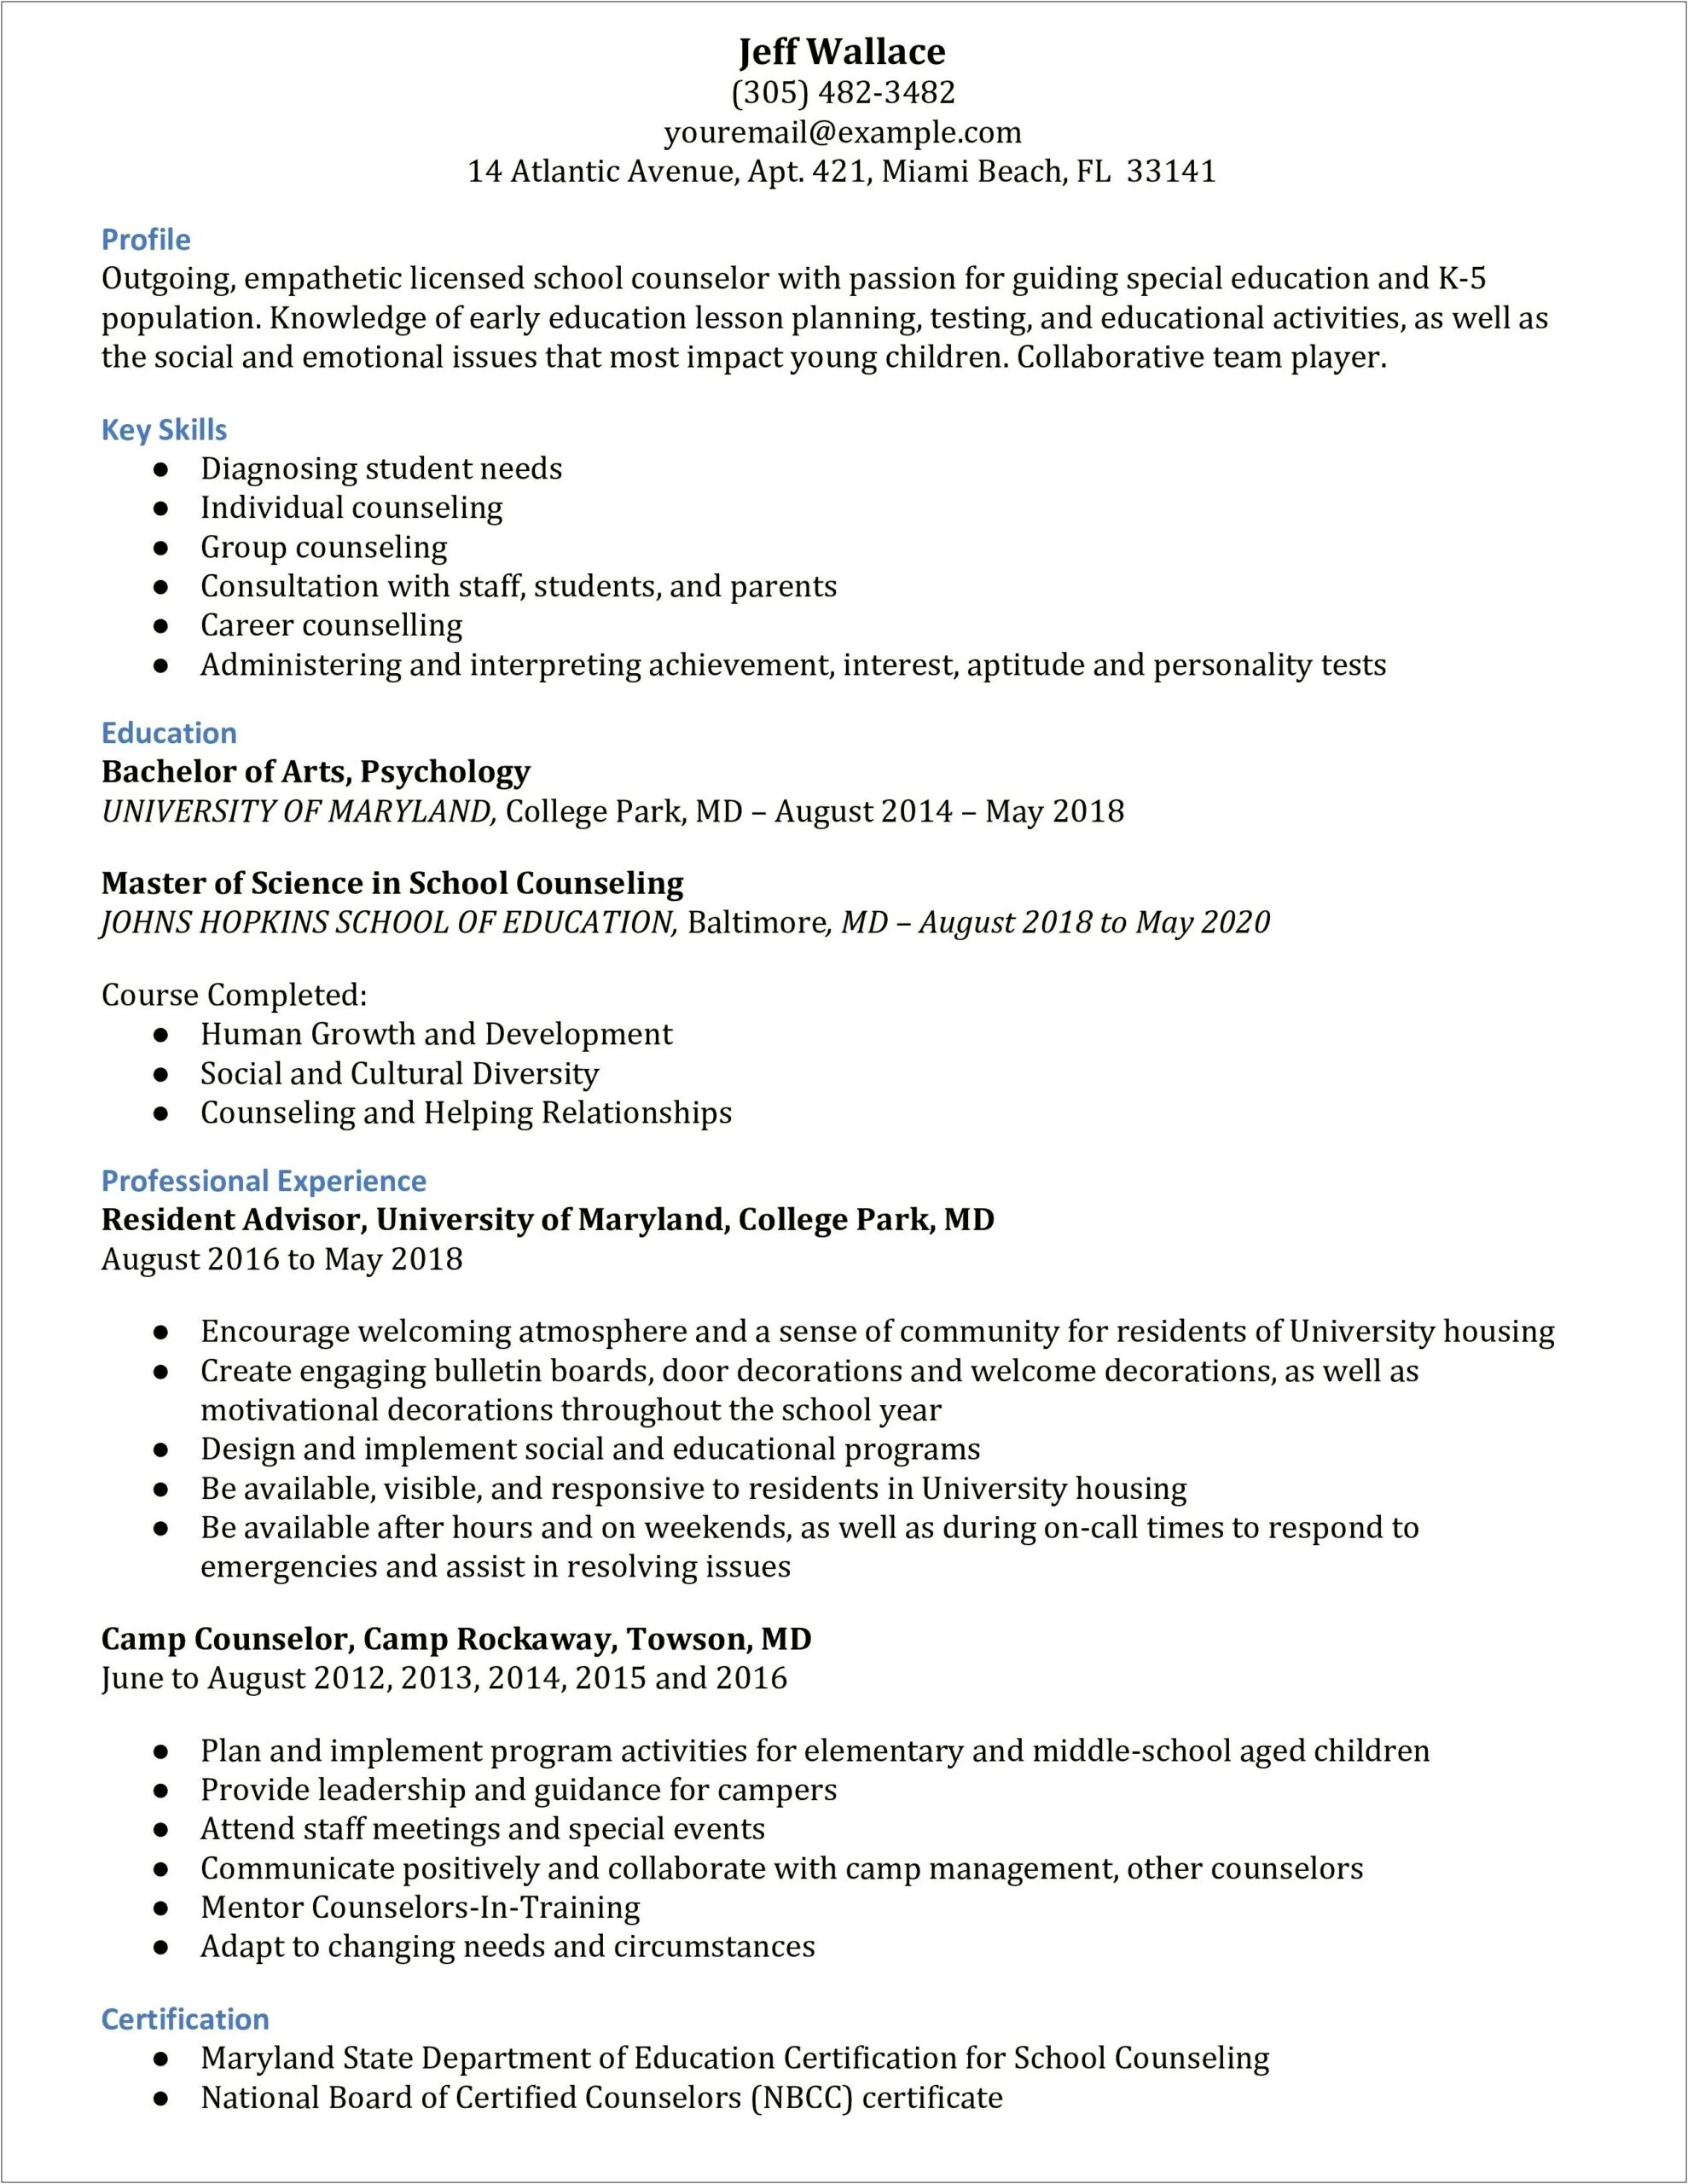 Skills For School Counseling Resume